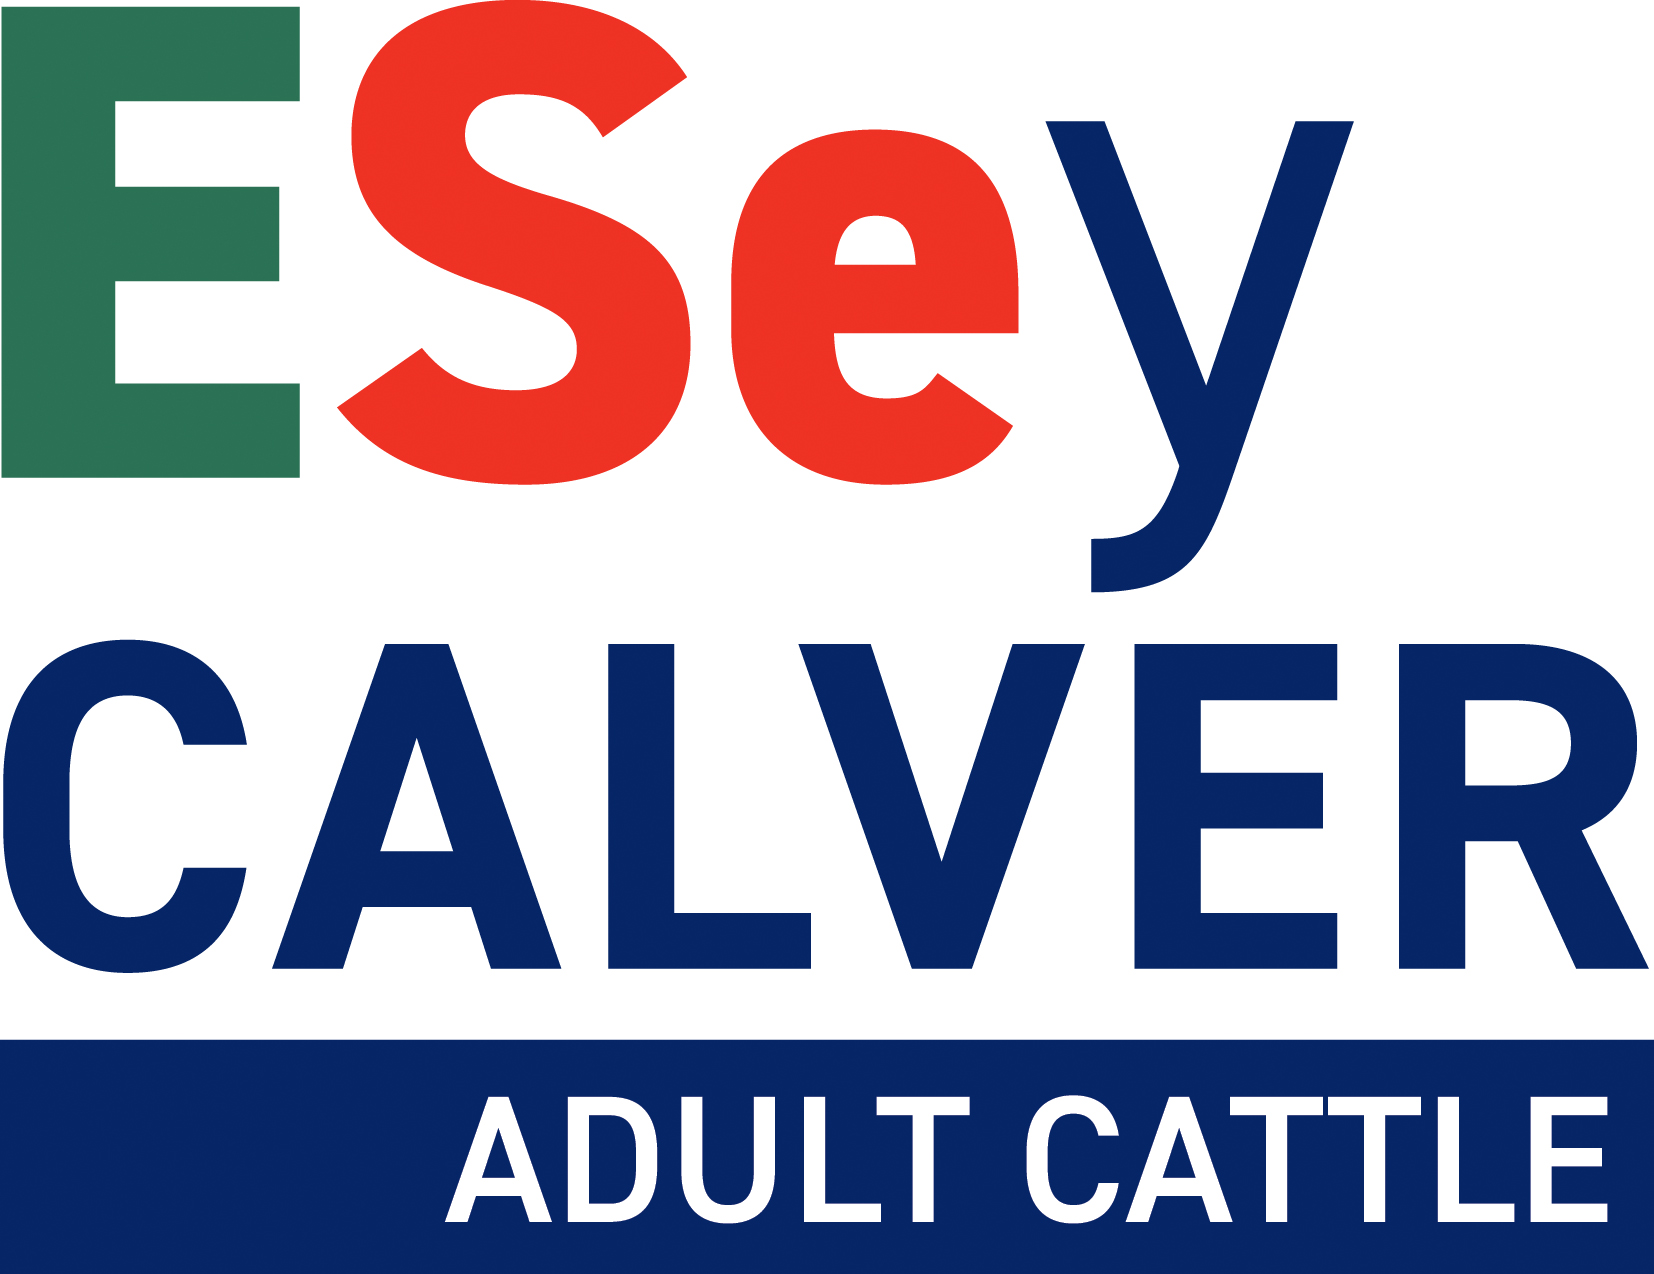 Dairy Cattle ESey CALVER ADULT CATTLE